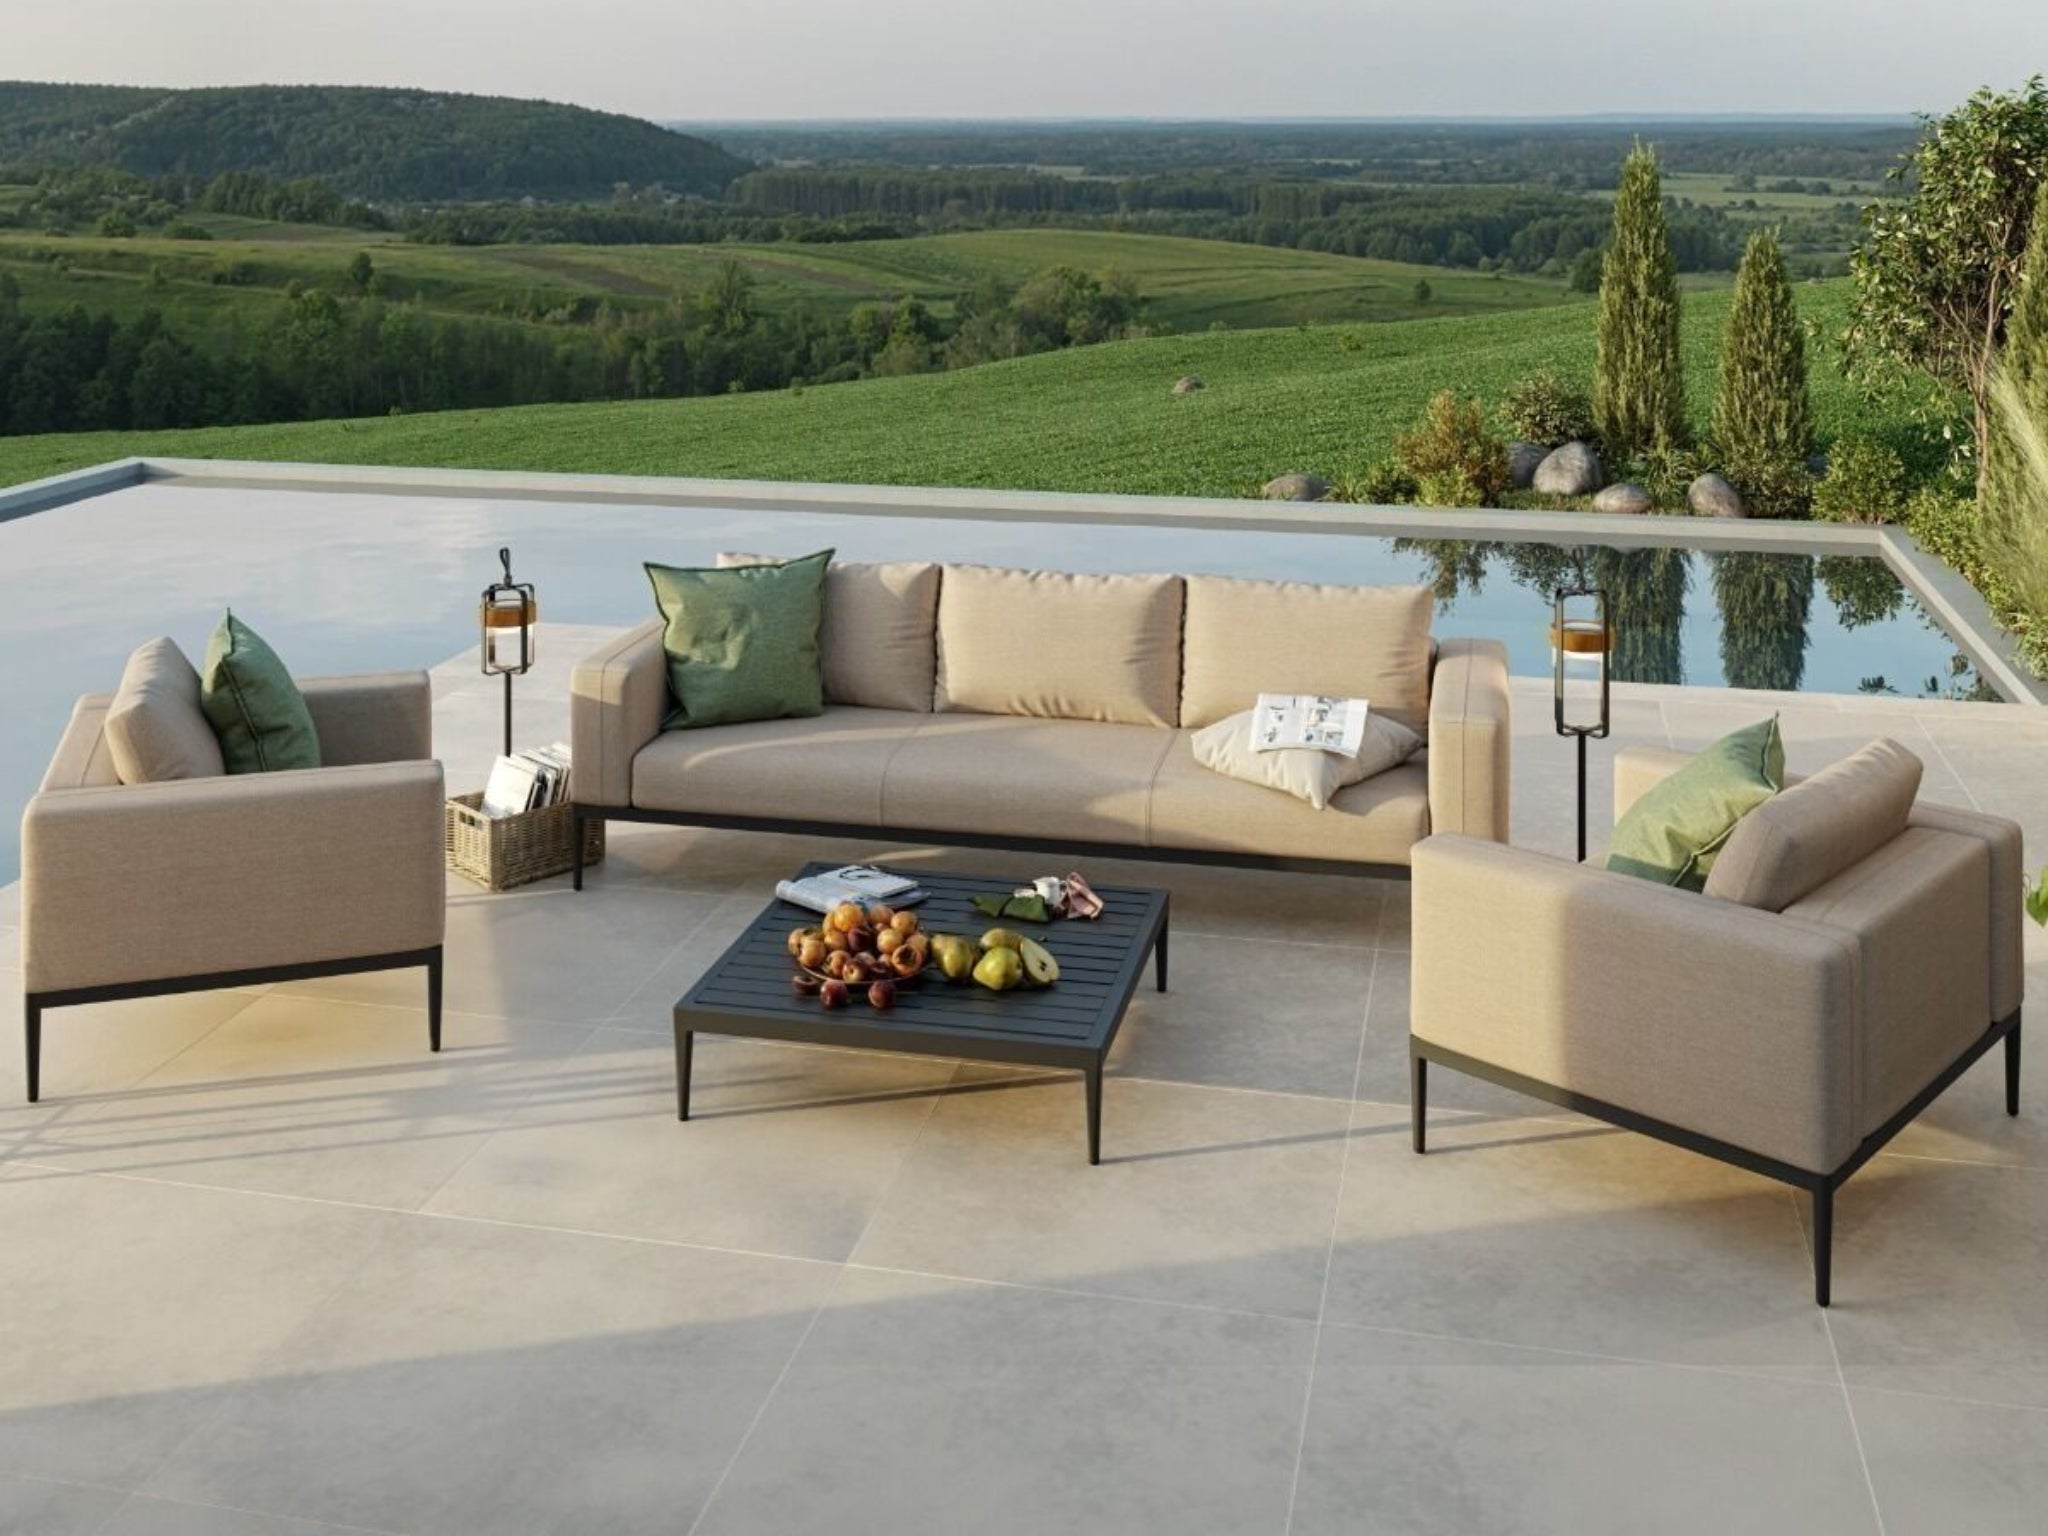 SIMPO Eve 4-Piece Outdoor Lounge Setting (3-Seater) — Taupe